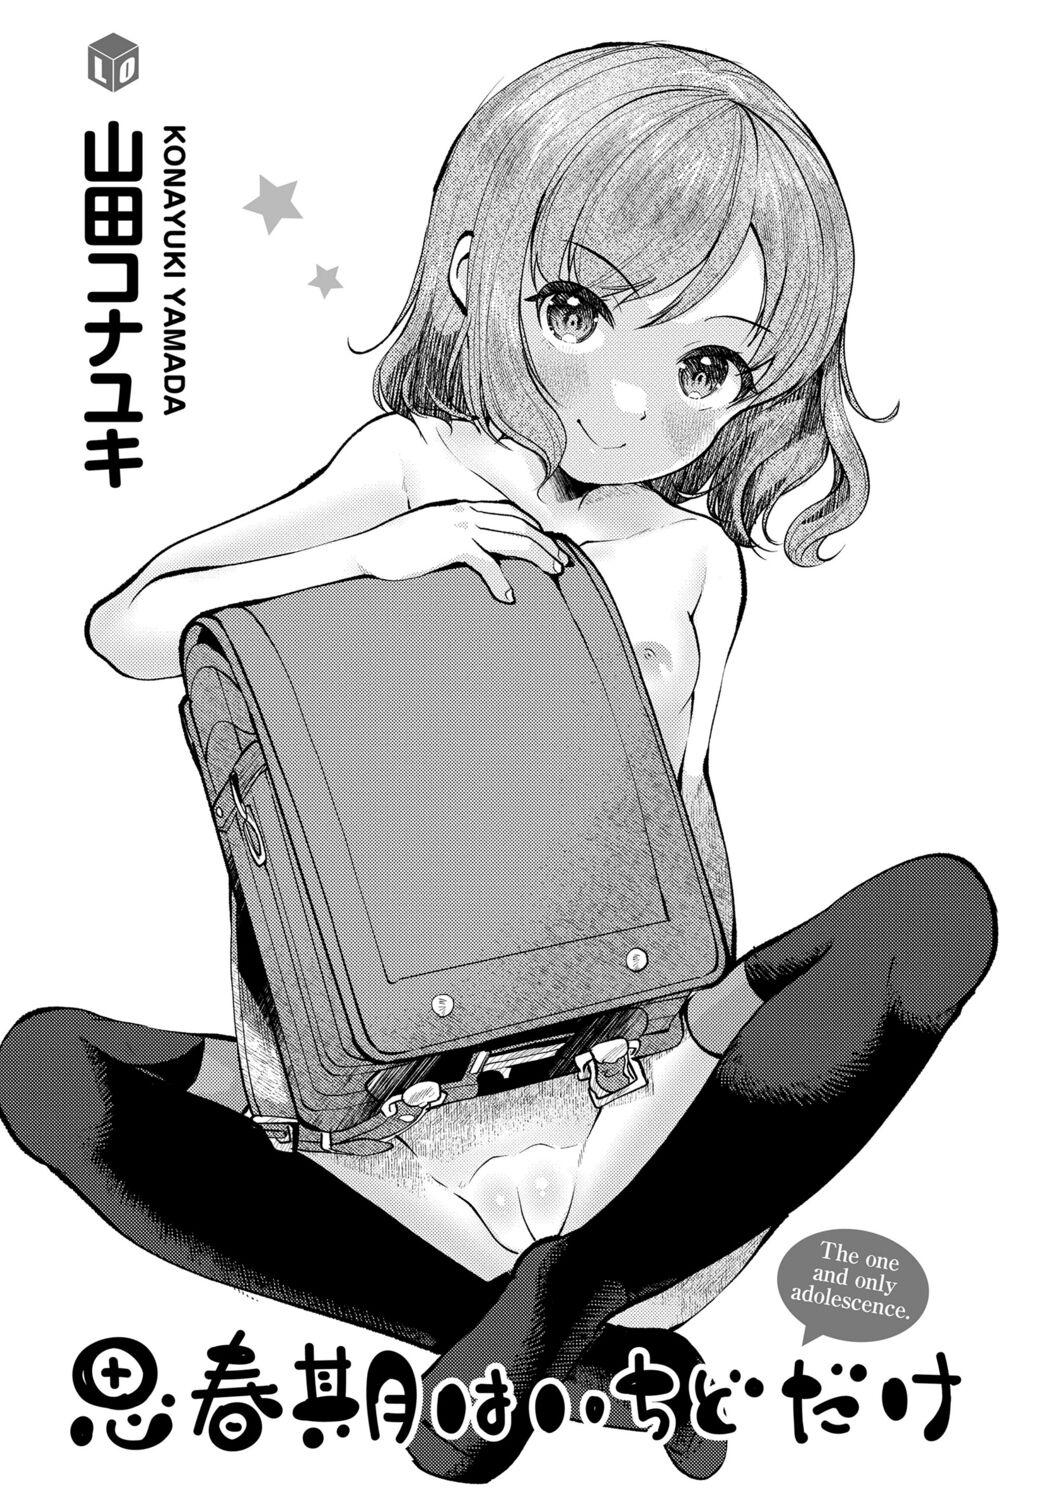 Online Shishunki wa Ichido dake - The one and only adolescence. Married - Page 3